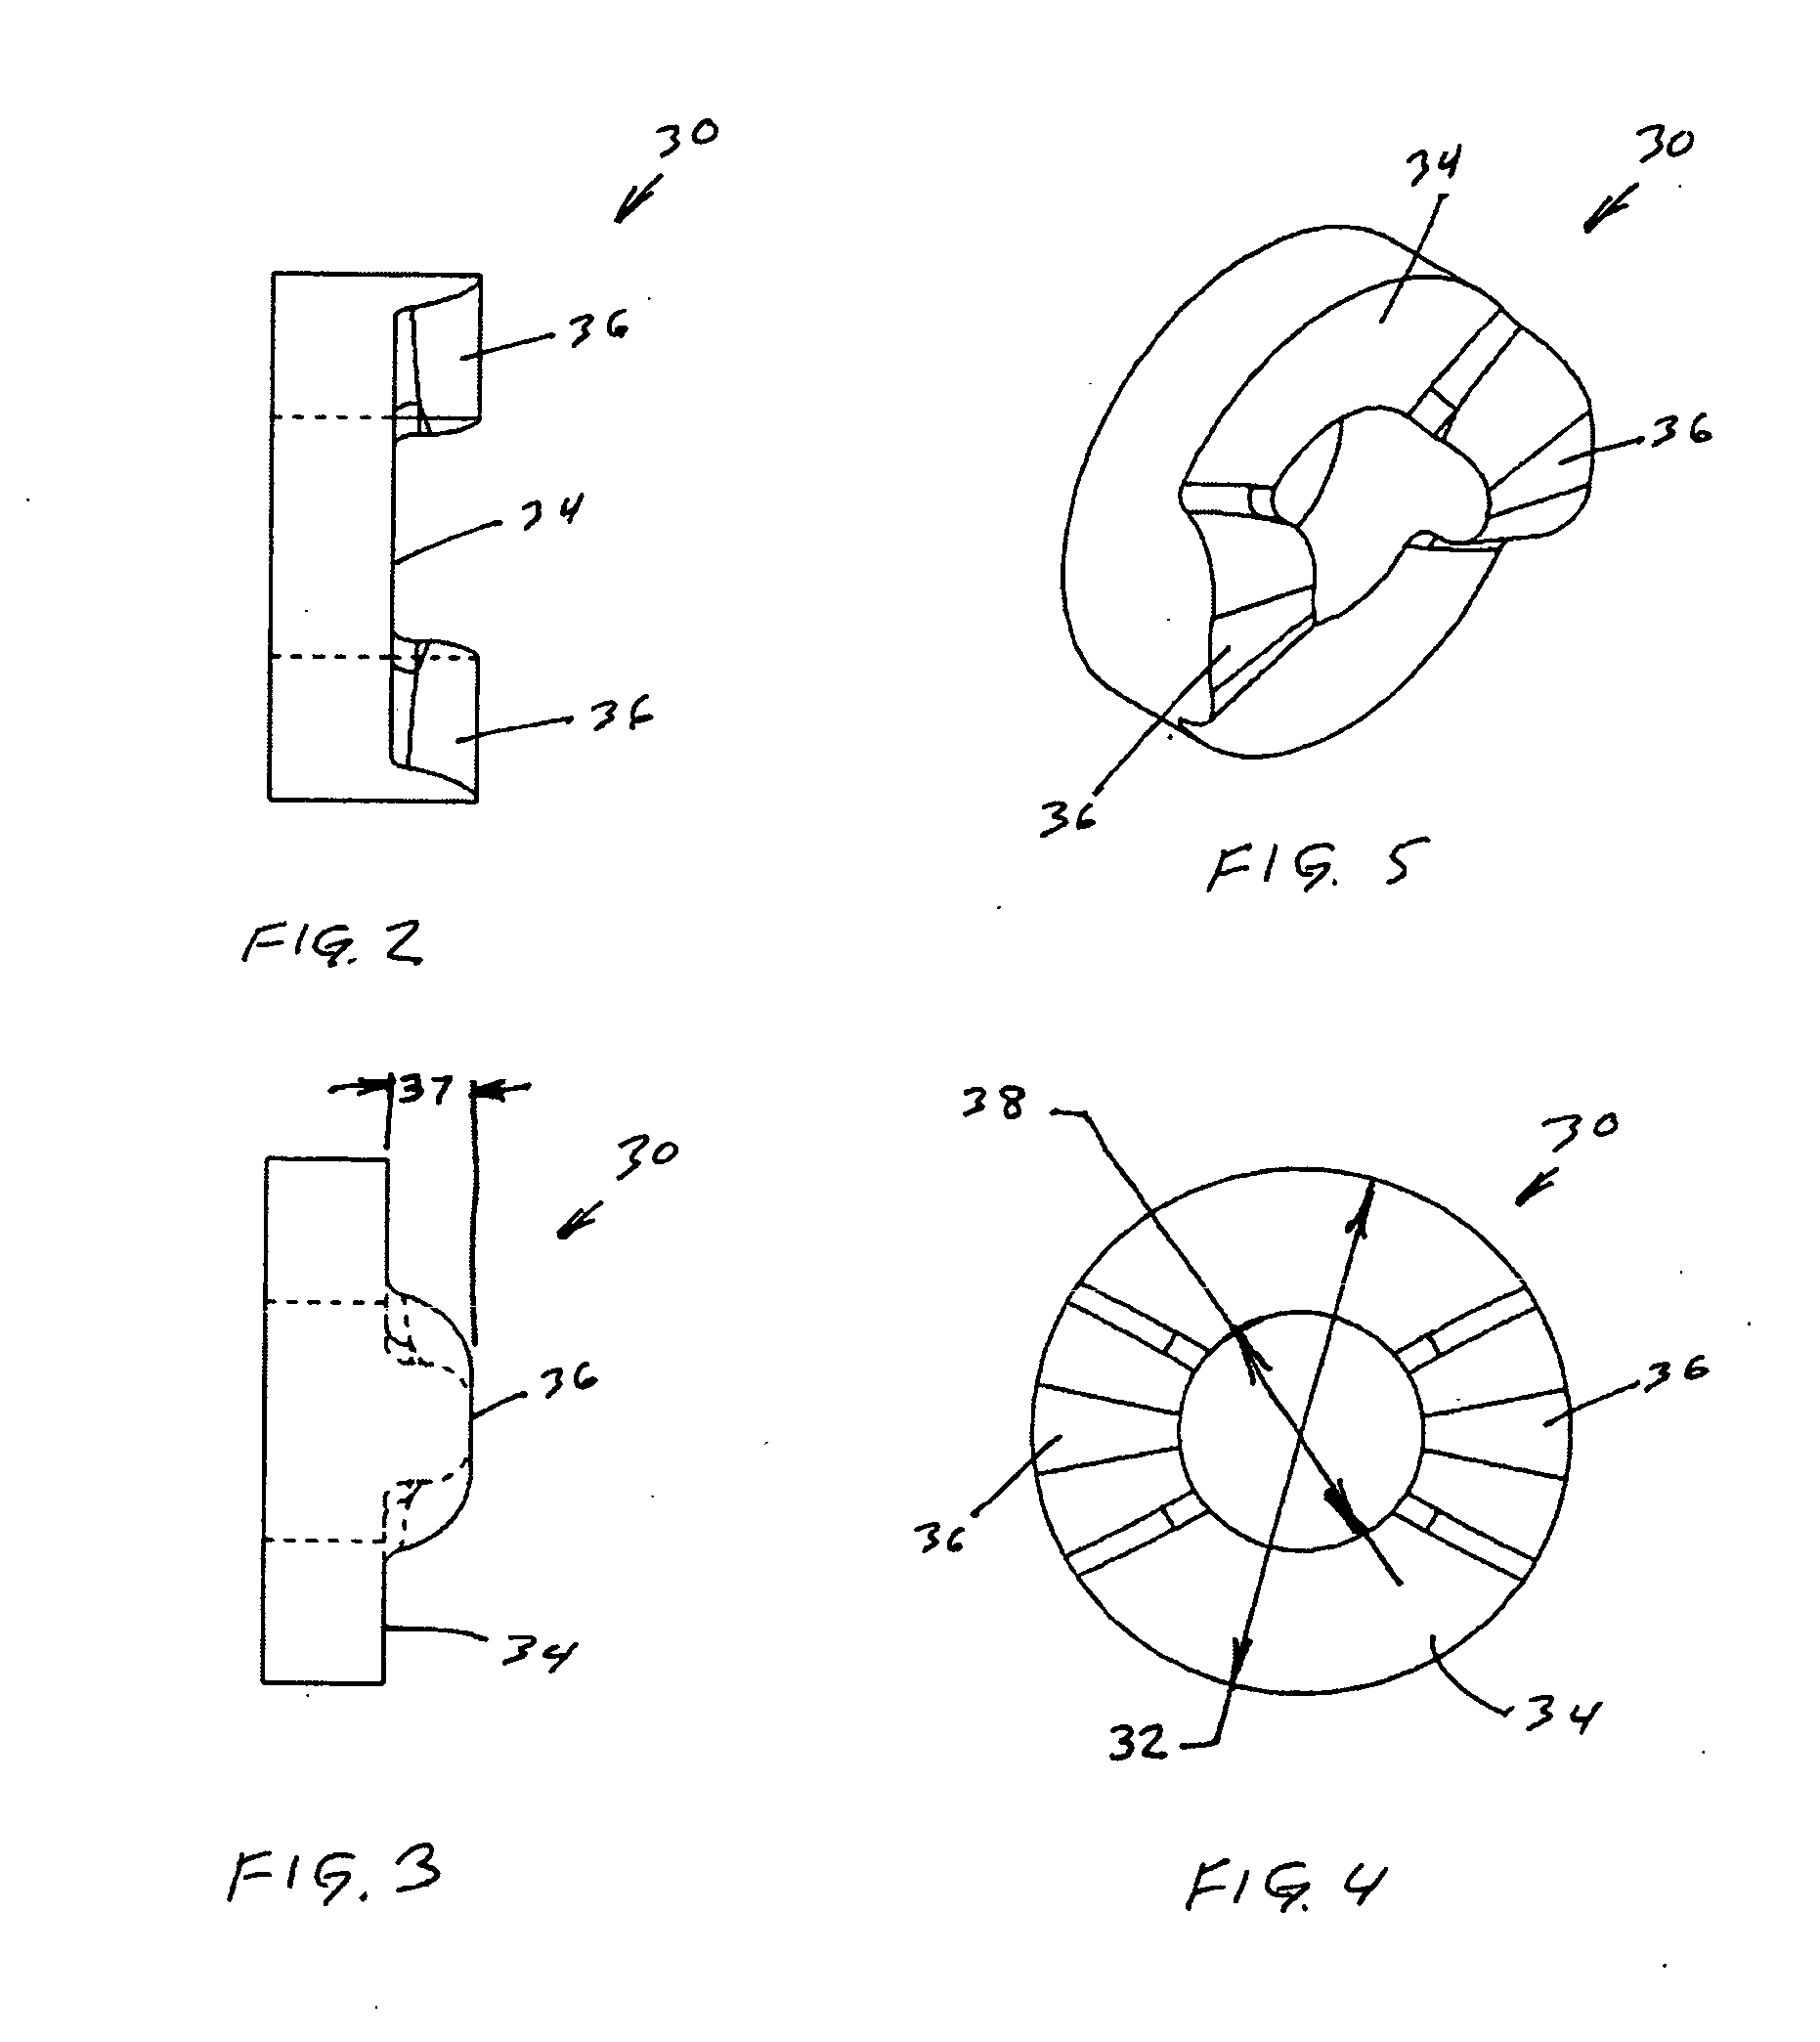 Endoscopic cutting instrument with axial and rotary motion